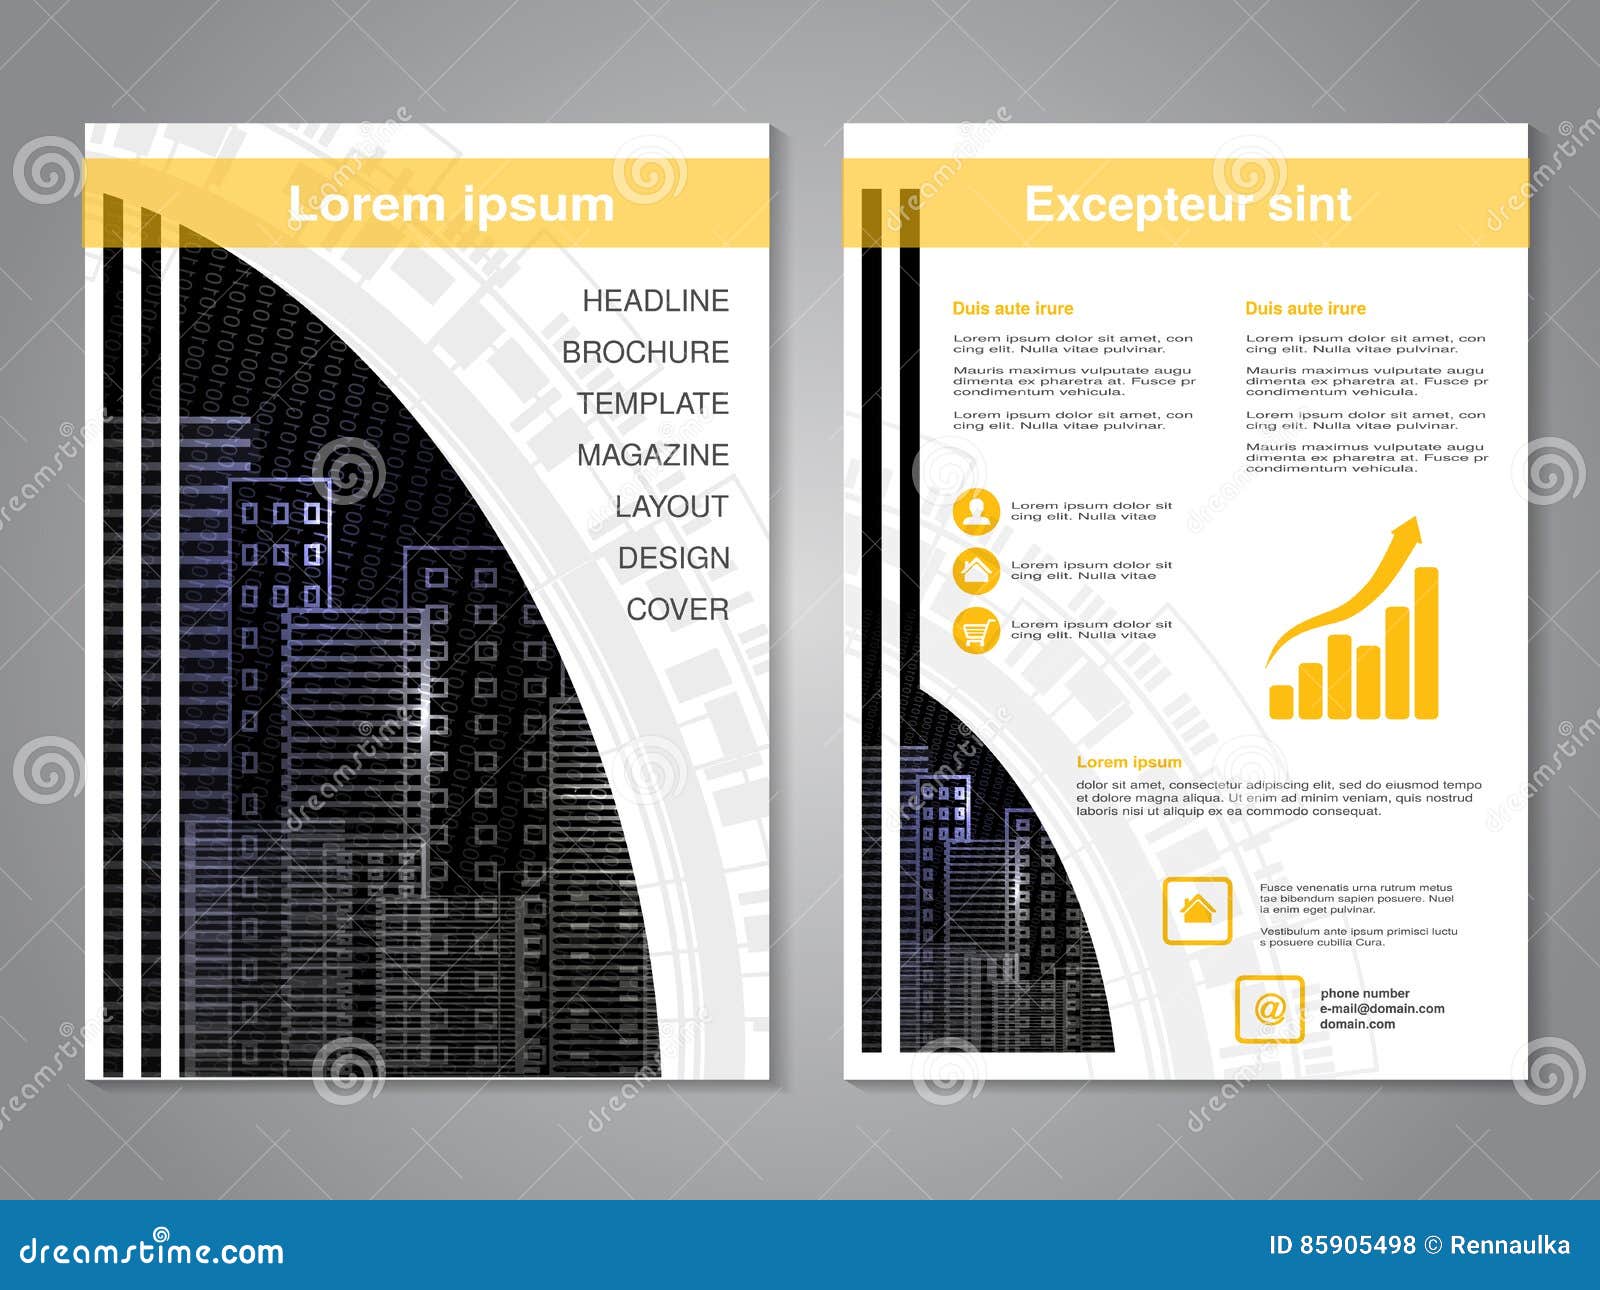 Modern Brochure Abstract Flyer With Background Of Illuminated Skyscrapers Buildings Layout Template Aspect Ratio For Size Stock Vector Illustration Of Concept Brochure